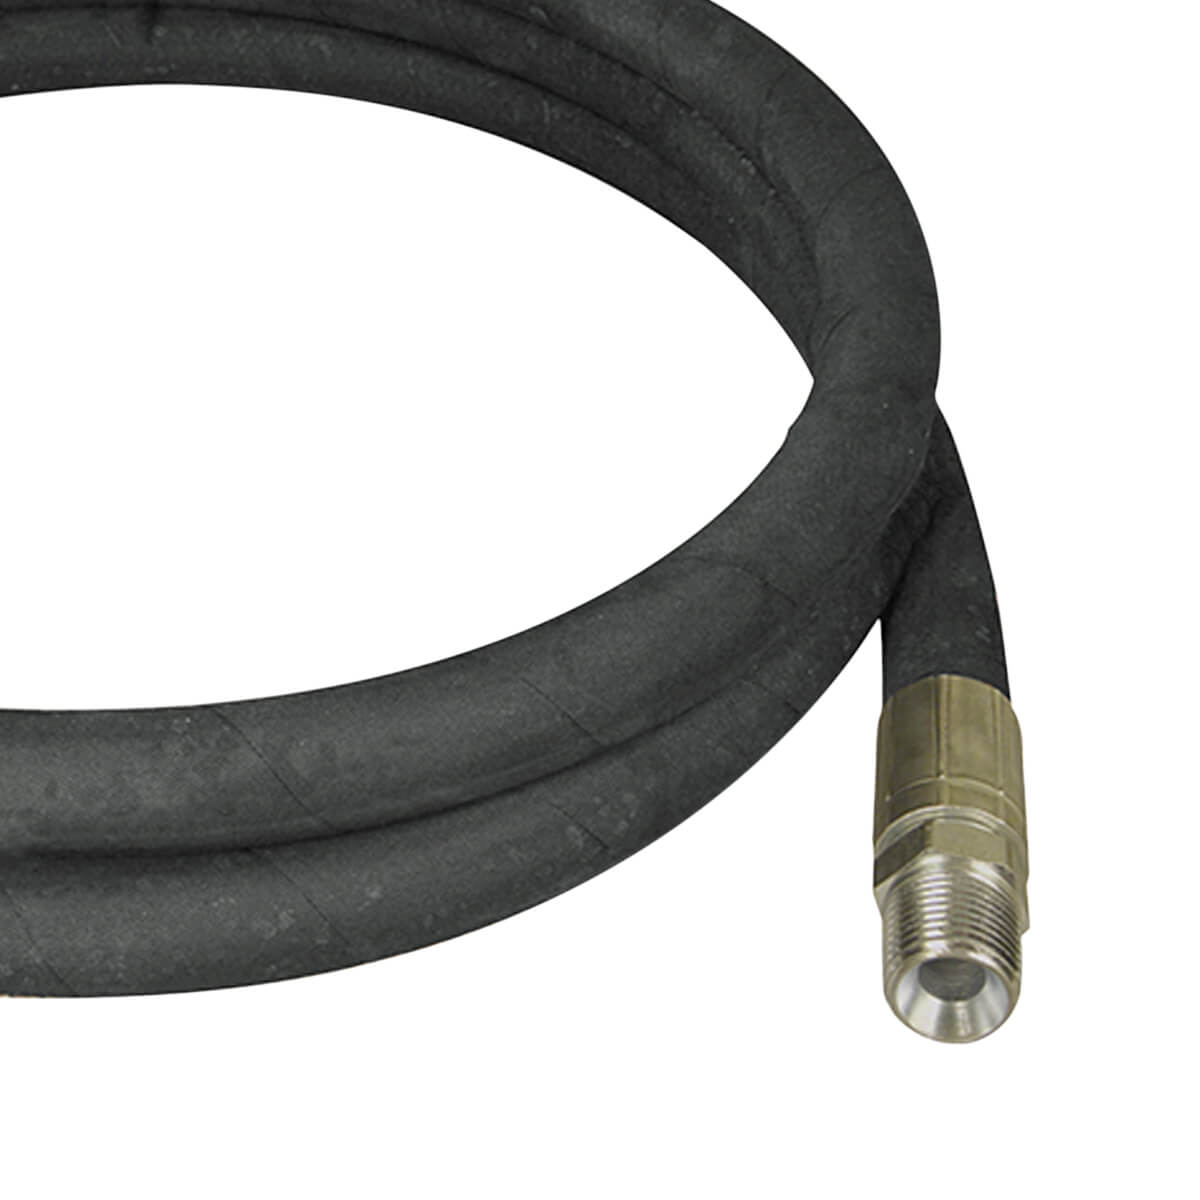 Hydraulic Hose Assembly - Male x Male - 1/2-in x 24-in